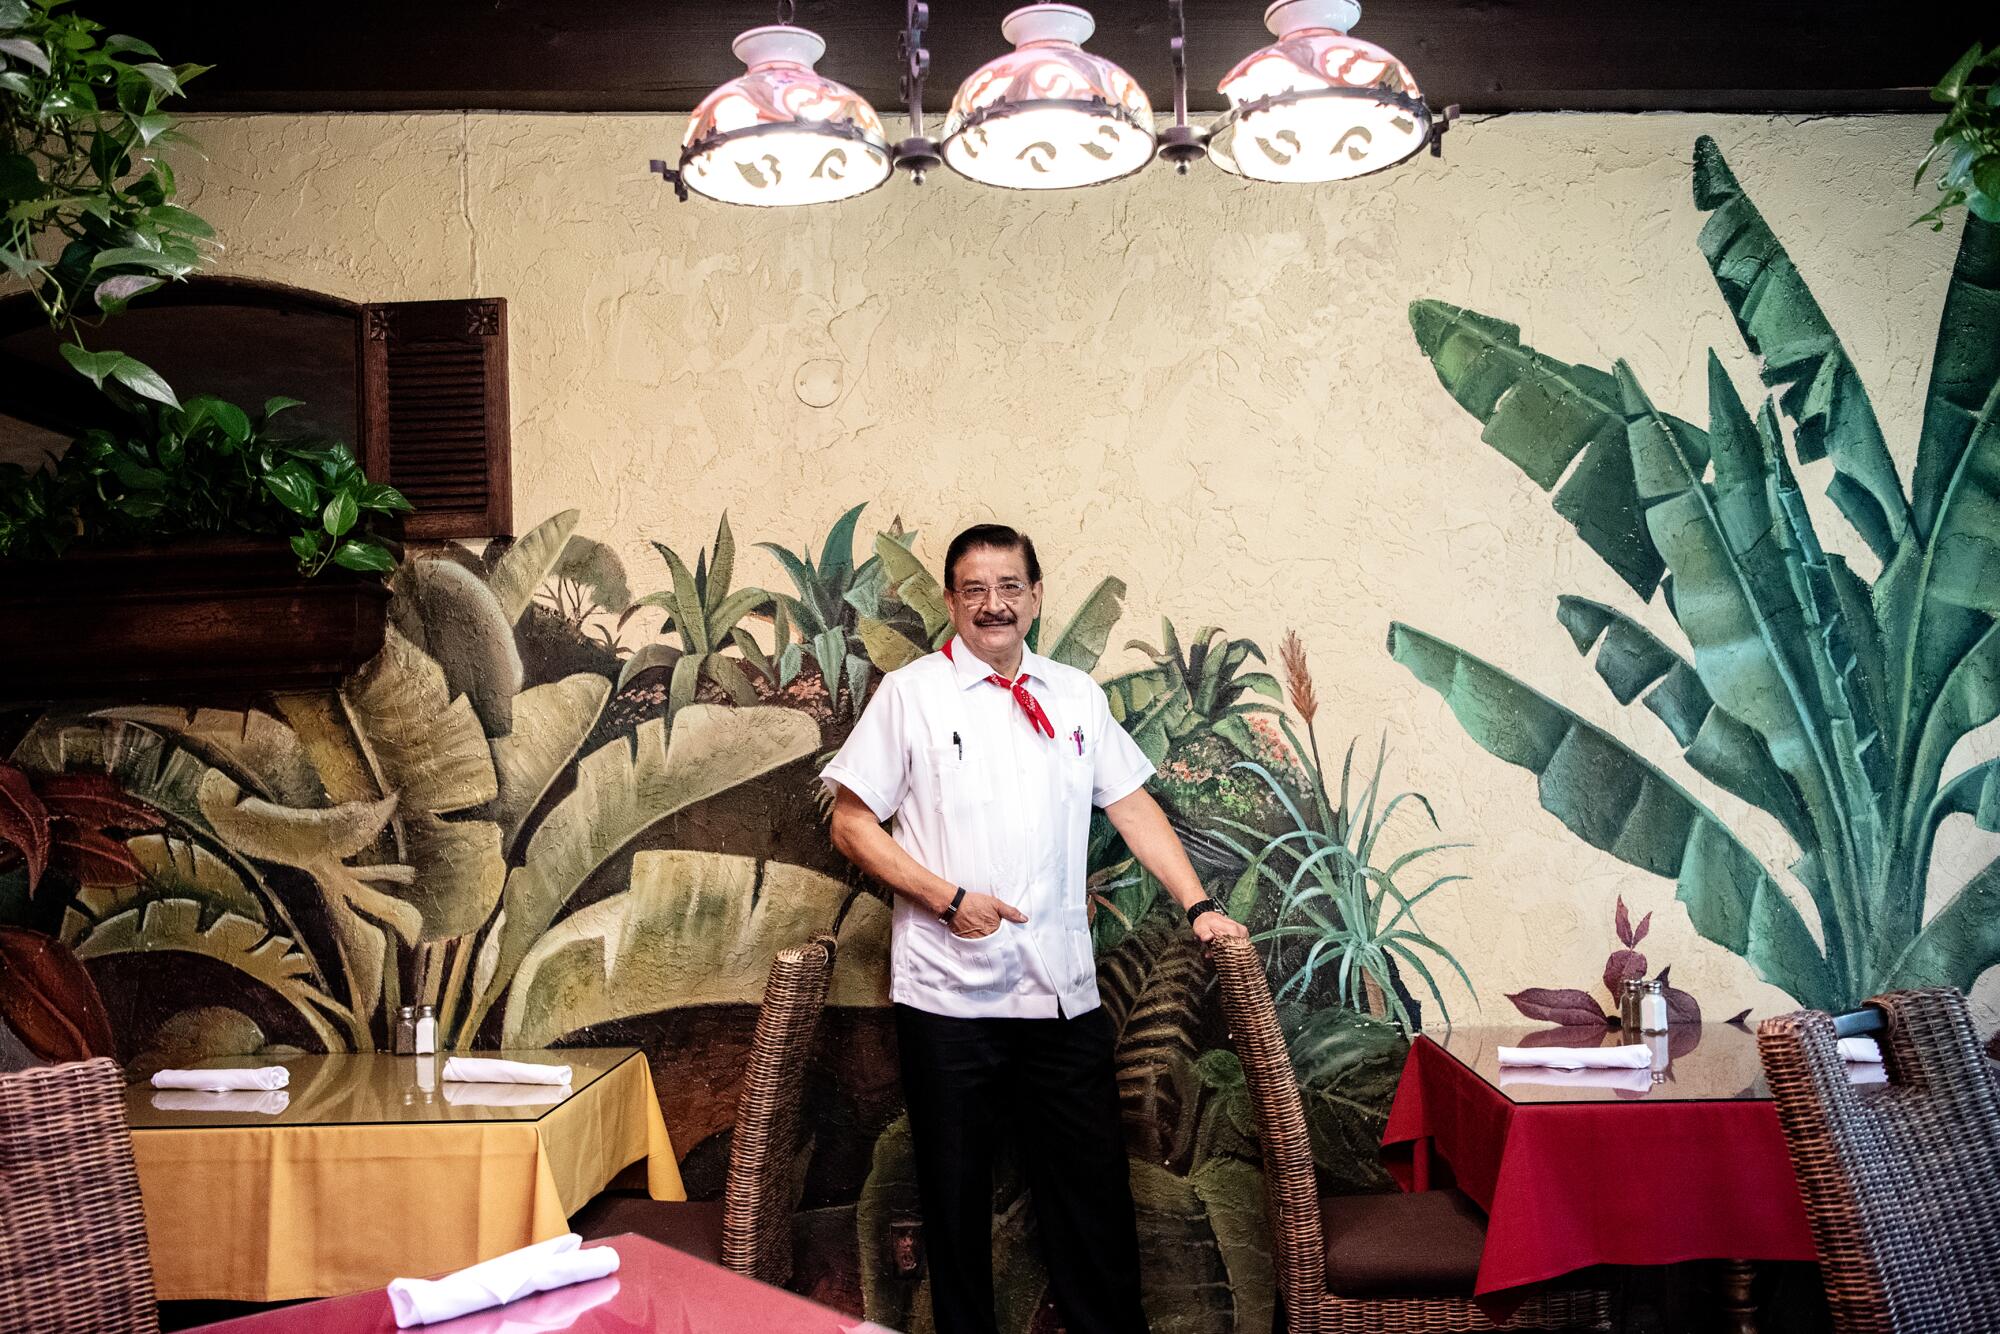 Justino Romero standing inside between two tables and in front of a wall with a colorful plant mural.